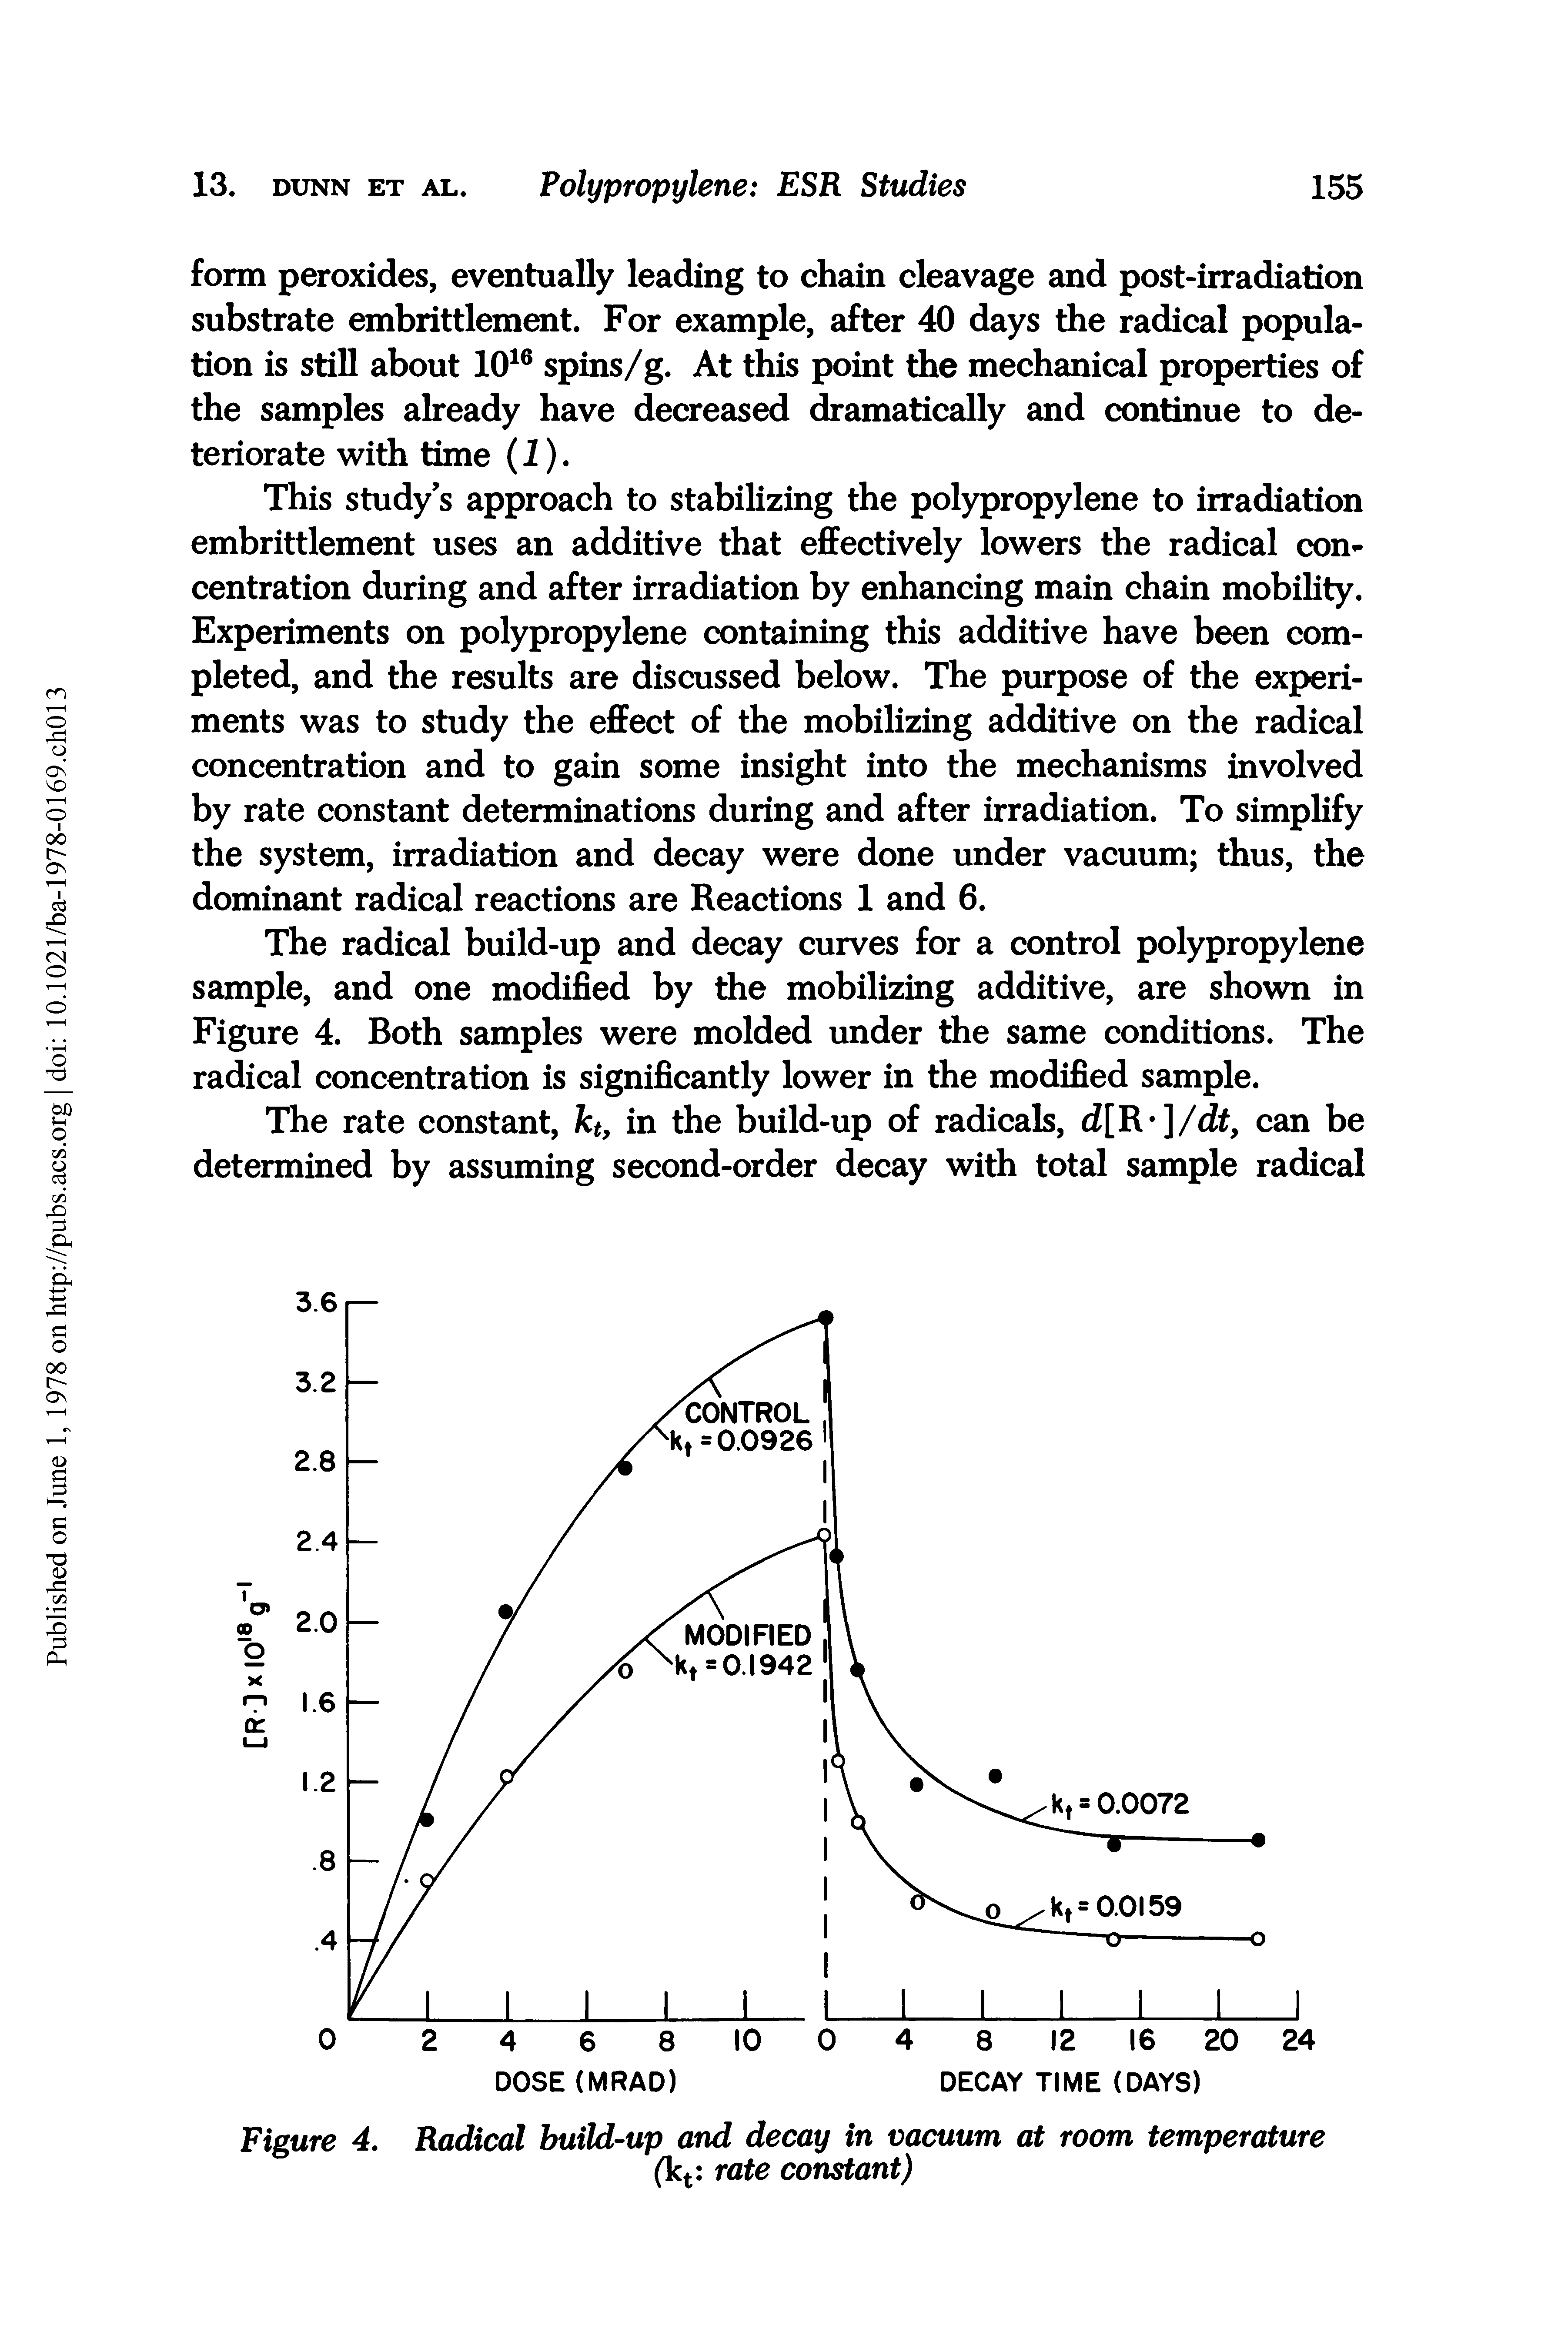 Figure 4. Radical build-up and decay in vacuum at room temperature...